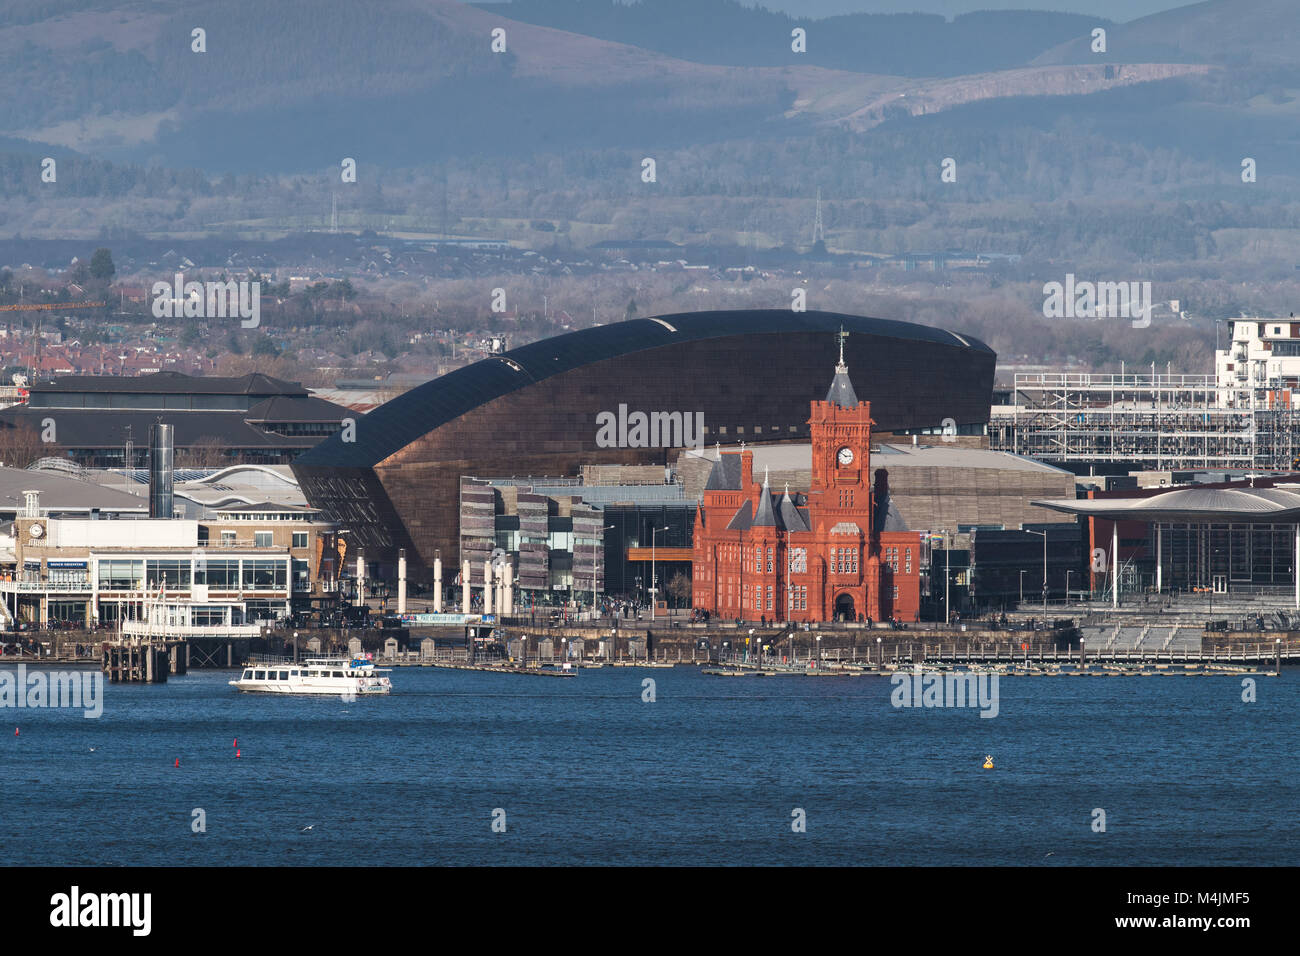 A view across Cardiff Bay towards the Pierhead Building and Wales Millennium Centre from the Penarth headland Stock Photo